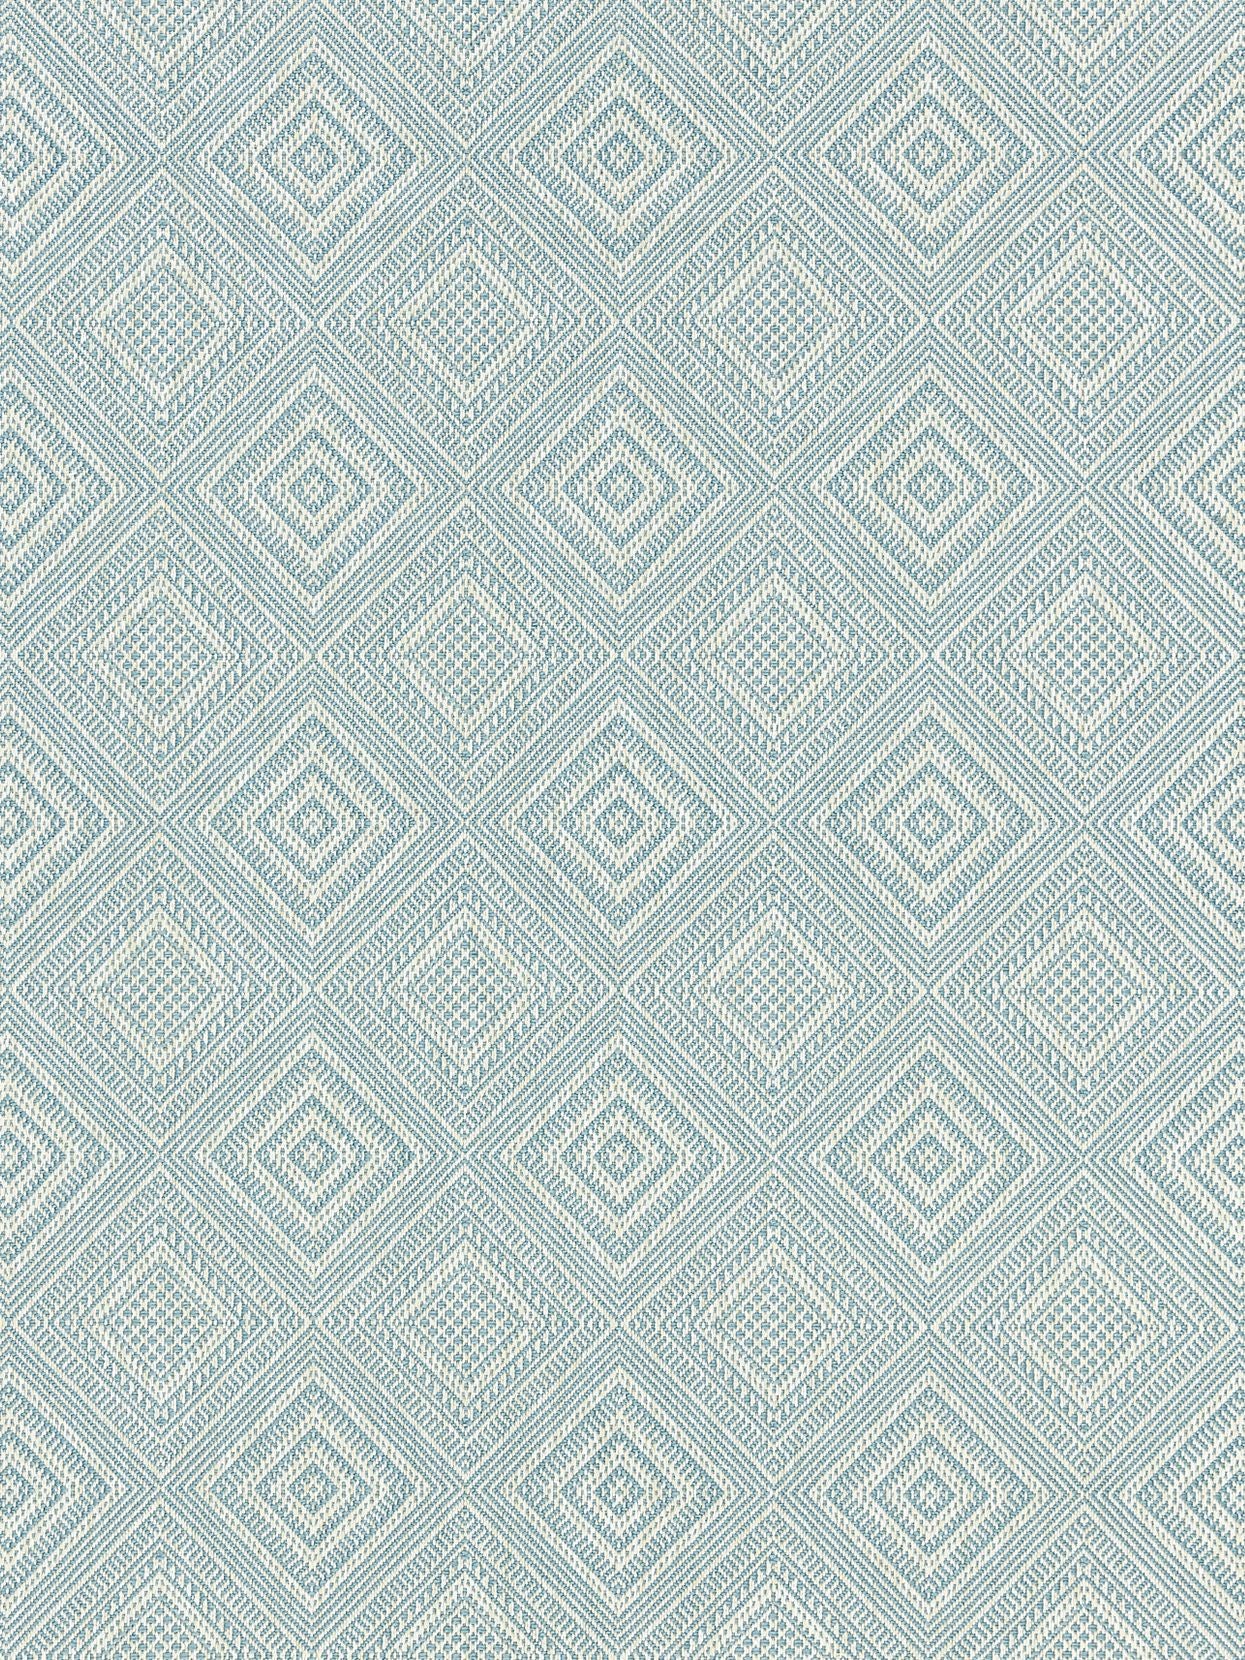 Antigua Weave fabric in sky color - pattern number SC 000327197 - by Scalamandre in the Scalamandre Fabrics Book 1 collection